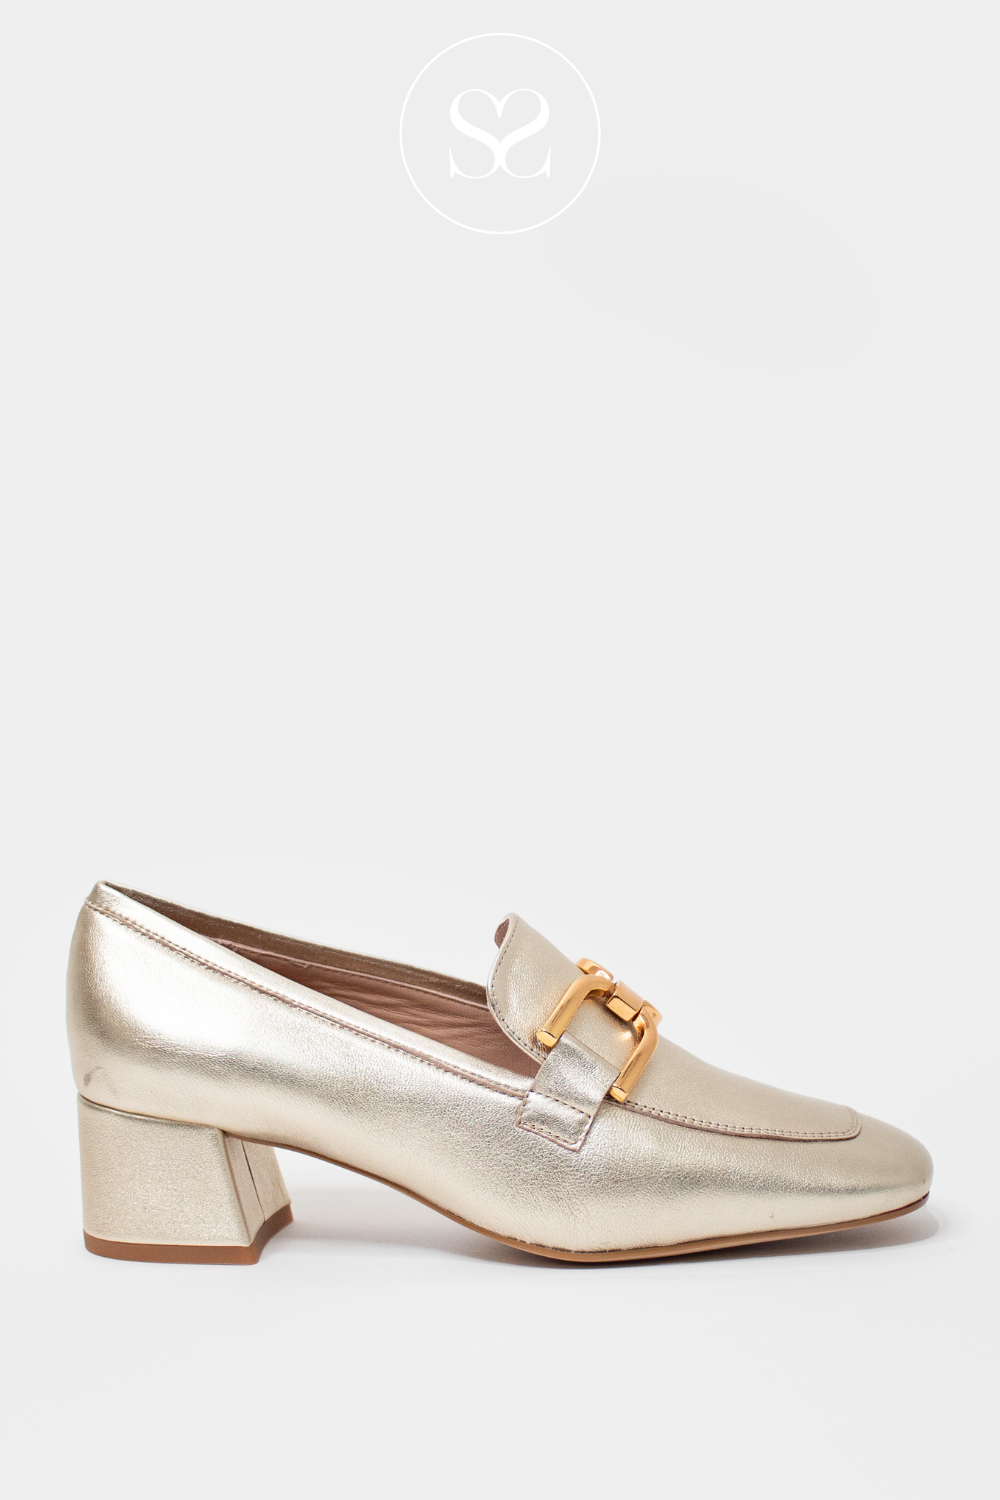 UNISA LOSIE GOLD LEATHER LOW BLOCK HEEL SLIP ON SHOE WITH GOLD BUCKLE